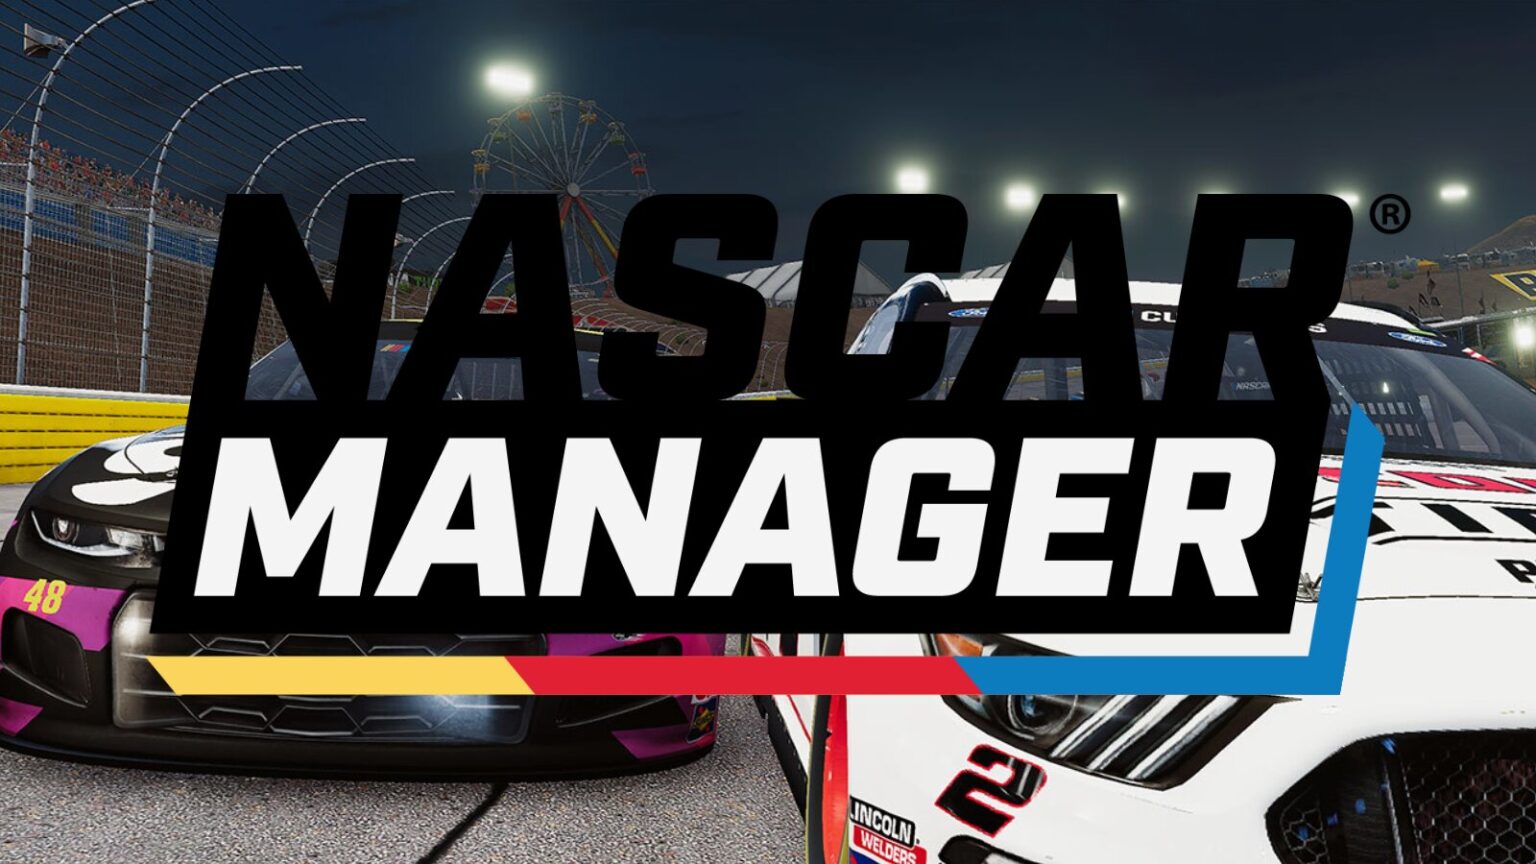 Race cars lined up in NASCAR Manager